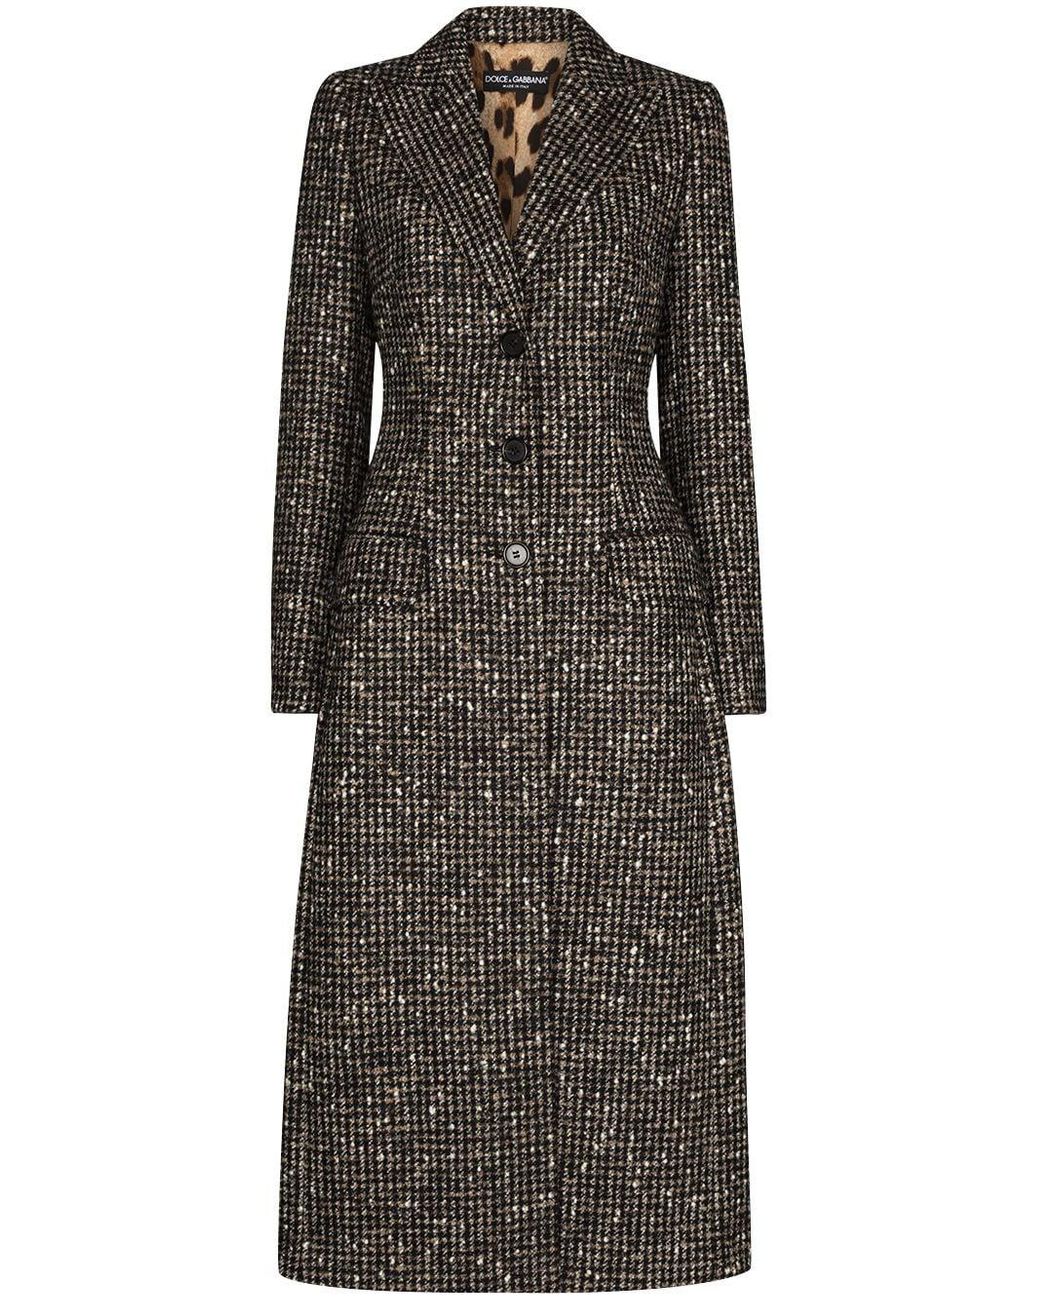 Dolce & Gabbana Wool Single-breasted Houndstooth Coat in Brown - Lyst